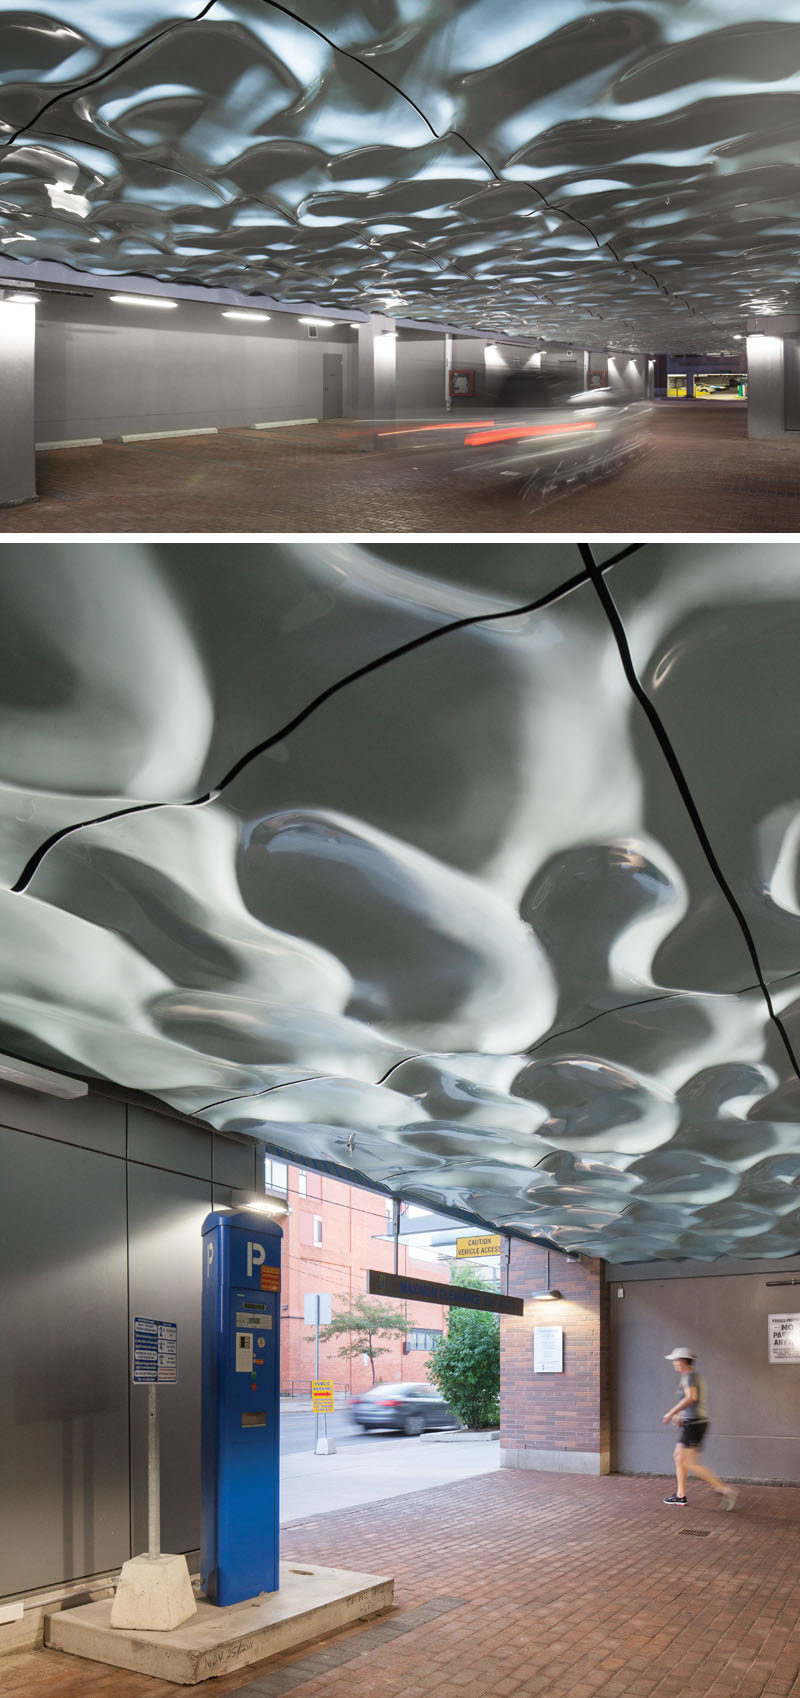 13 Amazing Examples Of Creative Sculptural Ceilings // This parking area in Toronto, Canada, has 100 sculptural fibreglass panels installed on the ceiling.